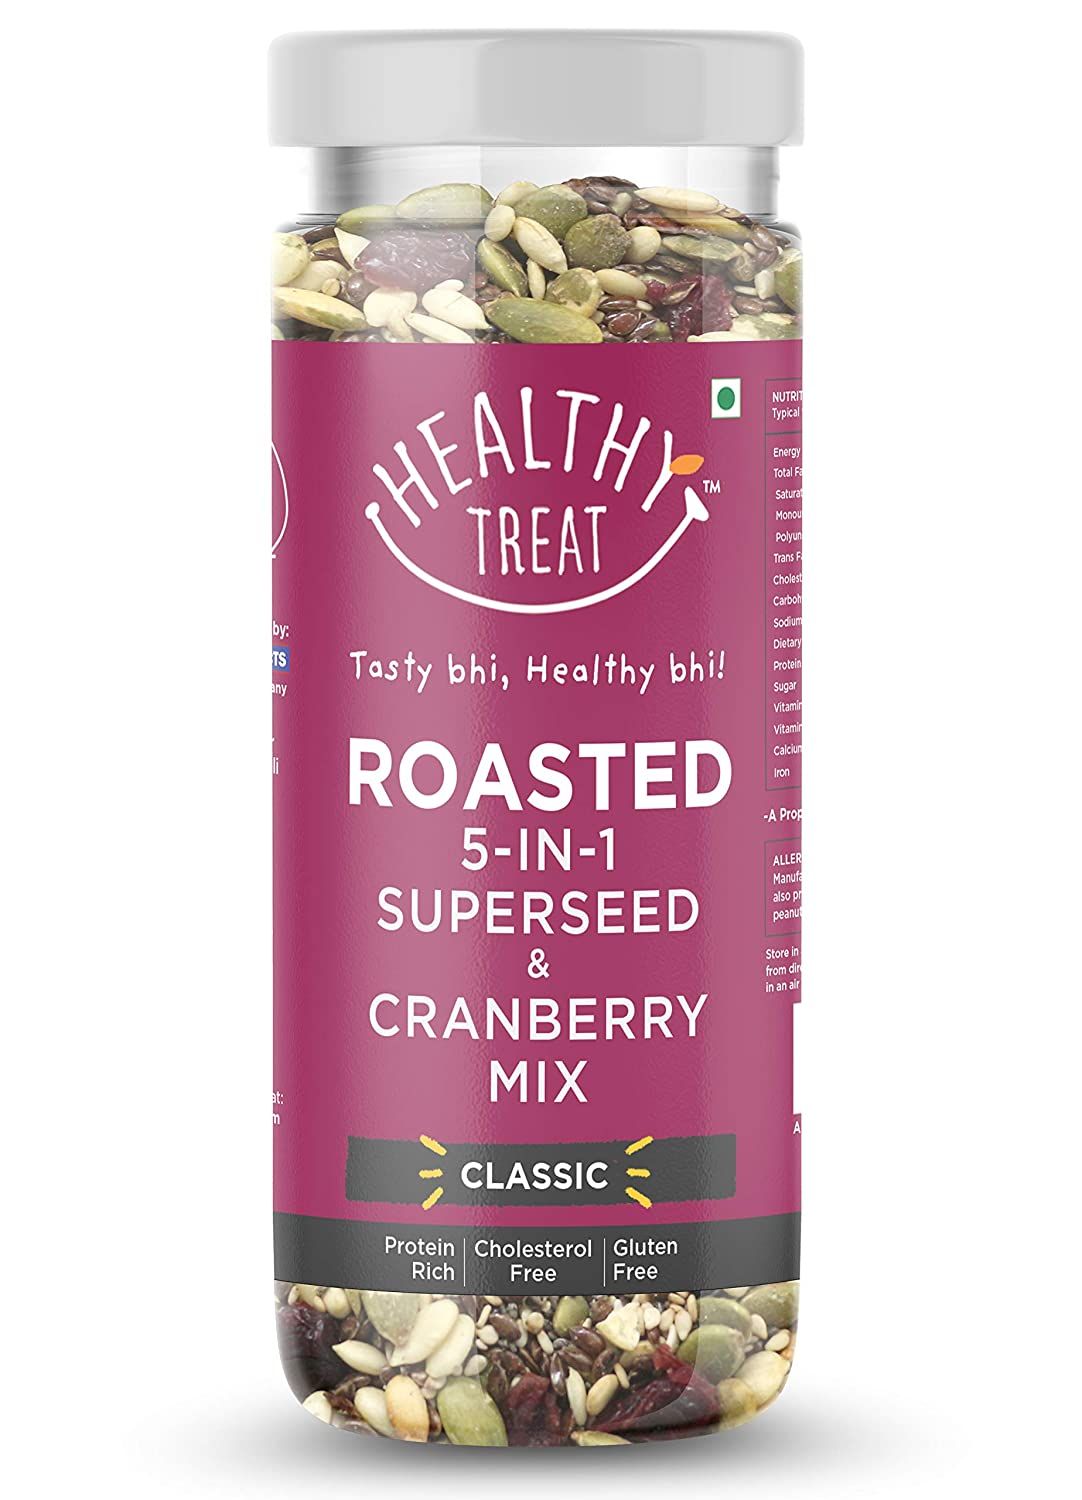 Healthy Treat Roasted 5 In 1 Superseed & Cranberry Mix Image